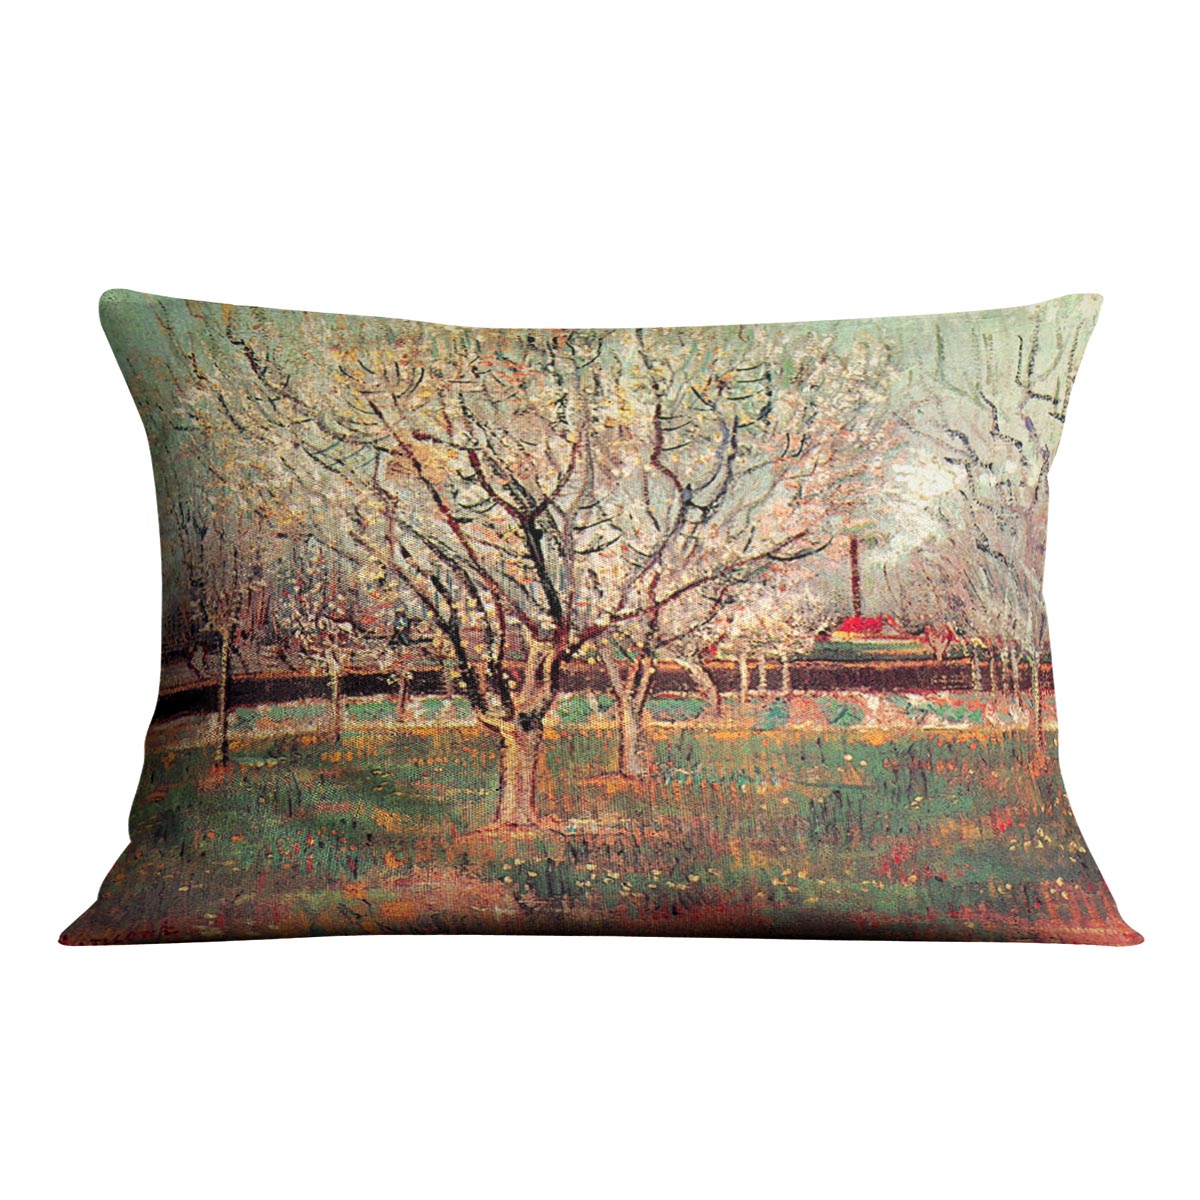 Orchard in Blossom Plum Trees by Van Gogh Cushion